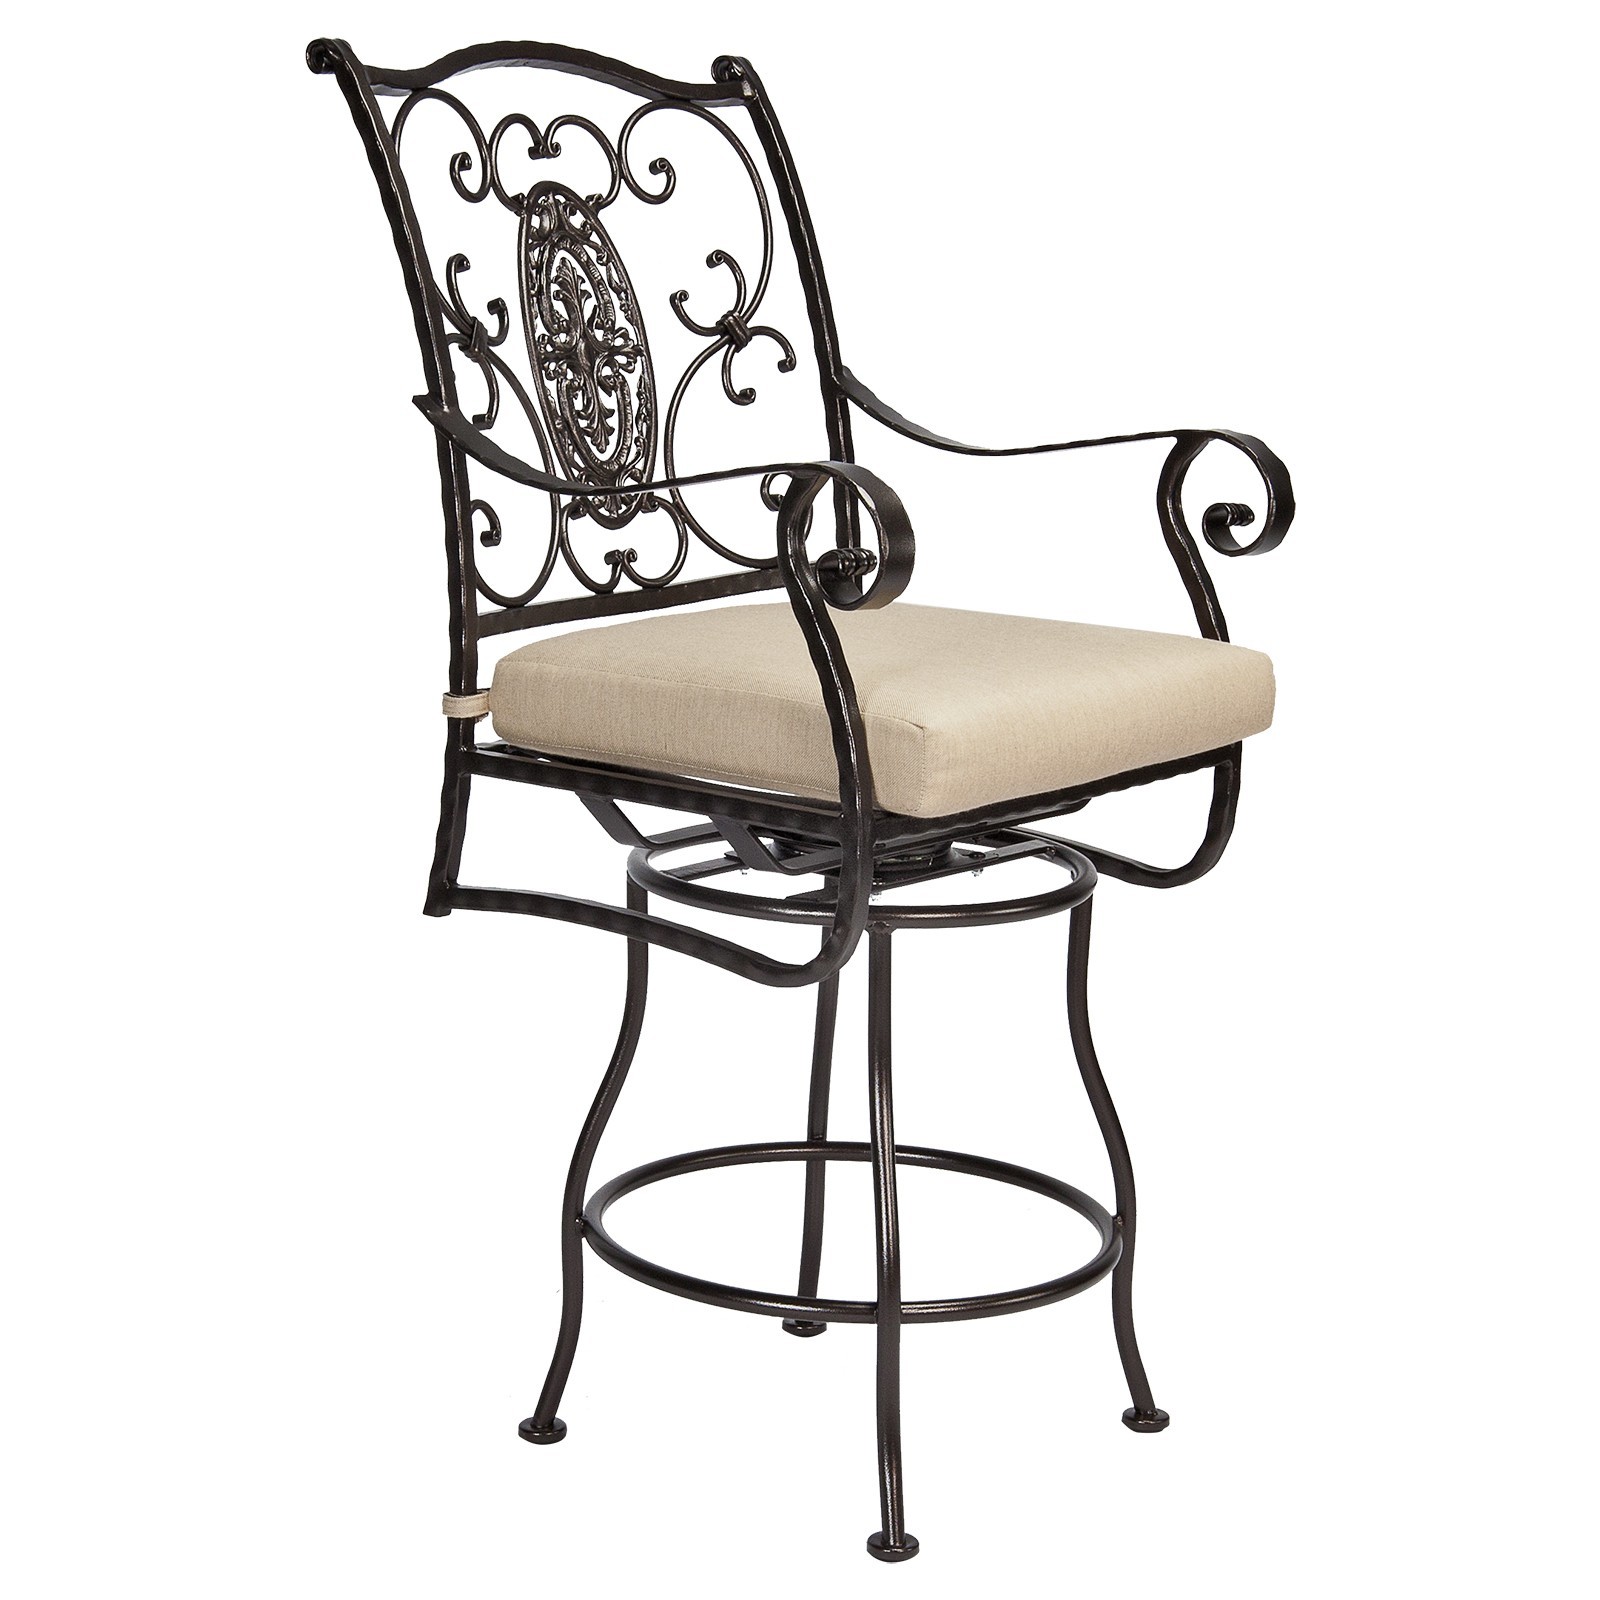 San Cristobal Swivel Counter Stool With Armsnbsp - Hausers Pationbsp